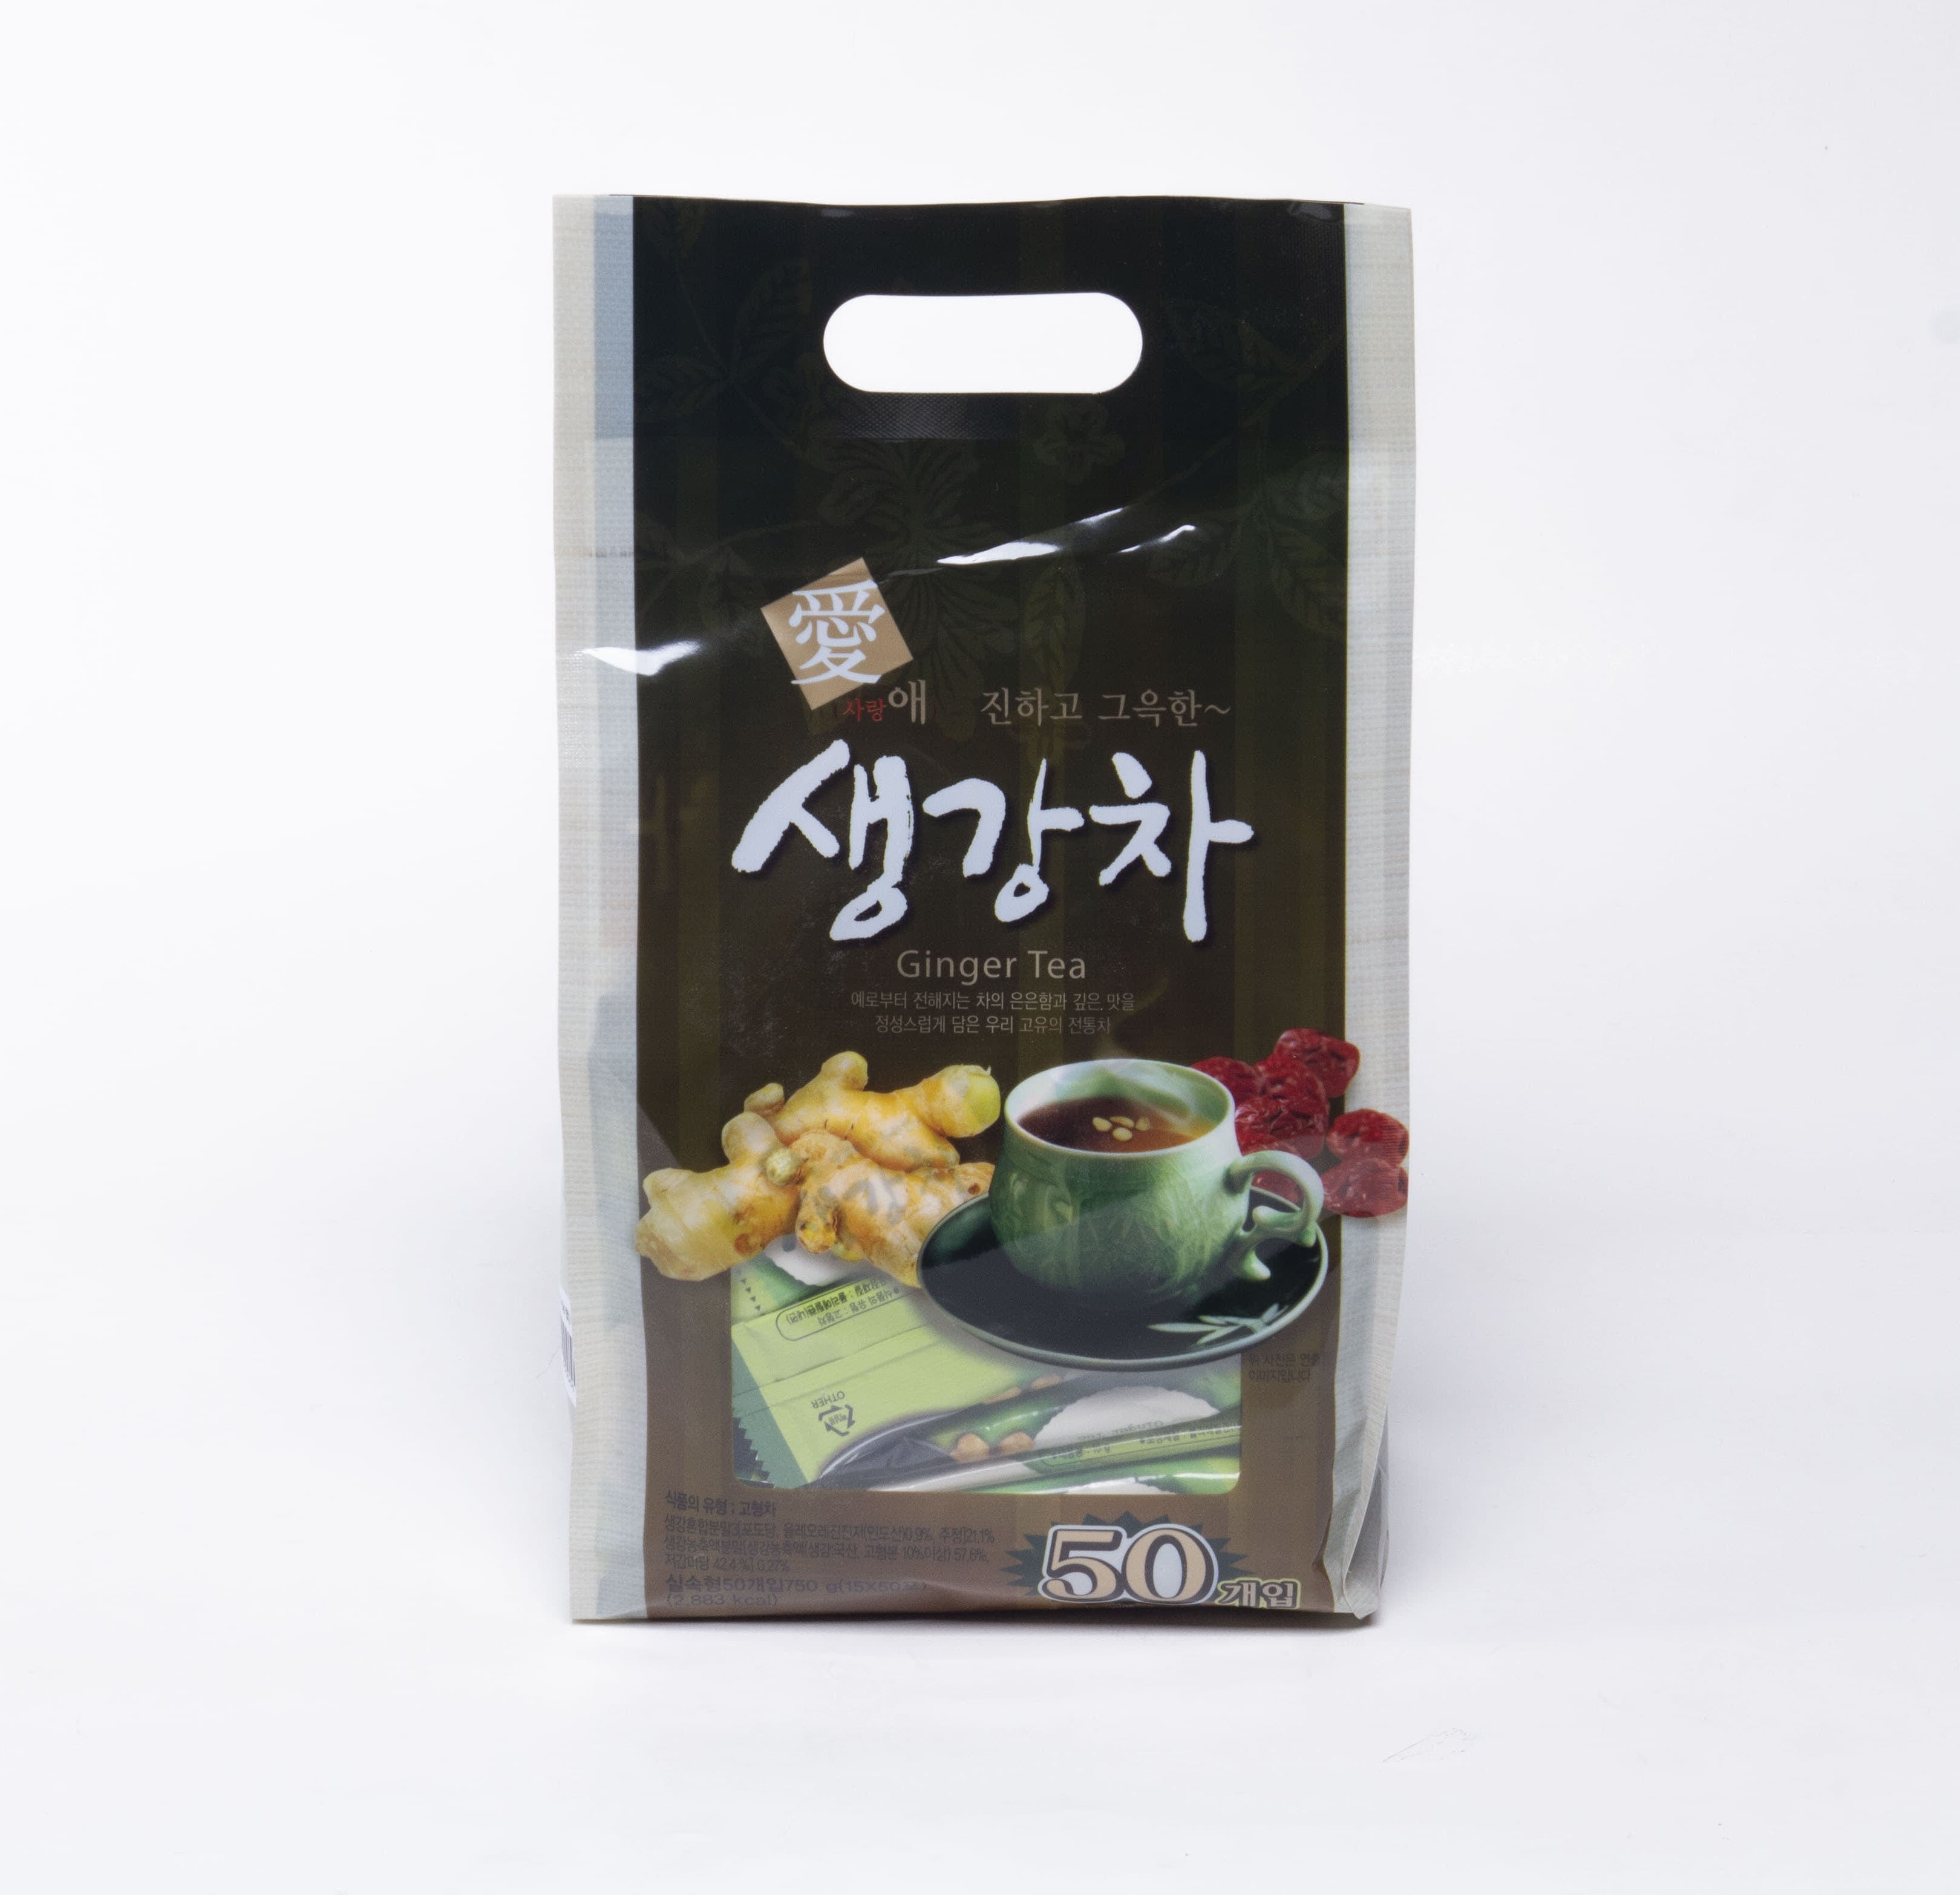 Ginger tea / Solid tea / Simple healthy snack / 15gx50 sachets / Dongil F&amp;T